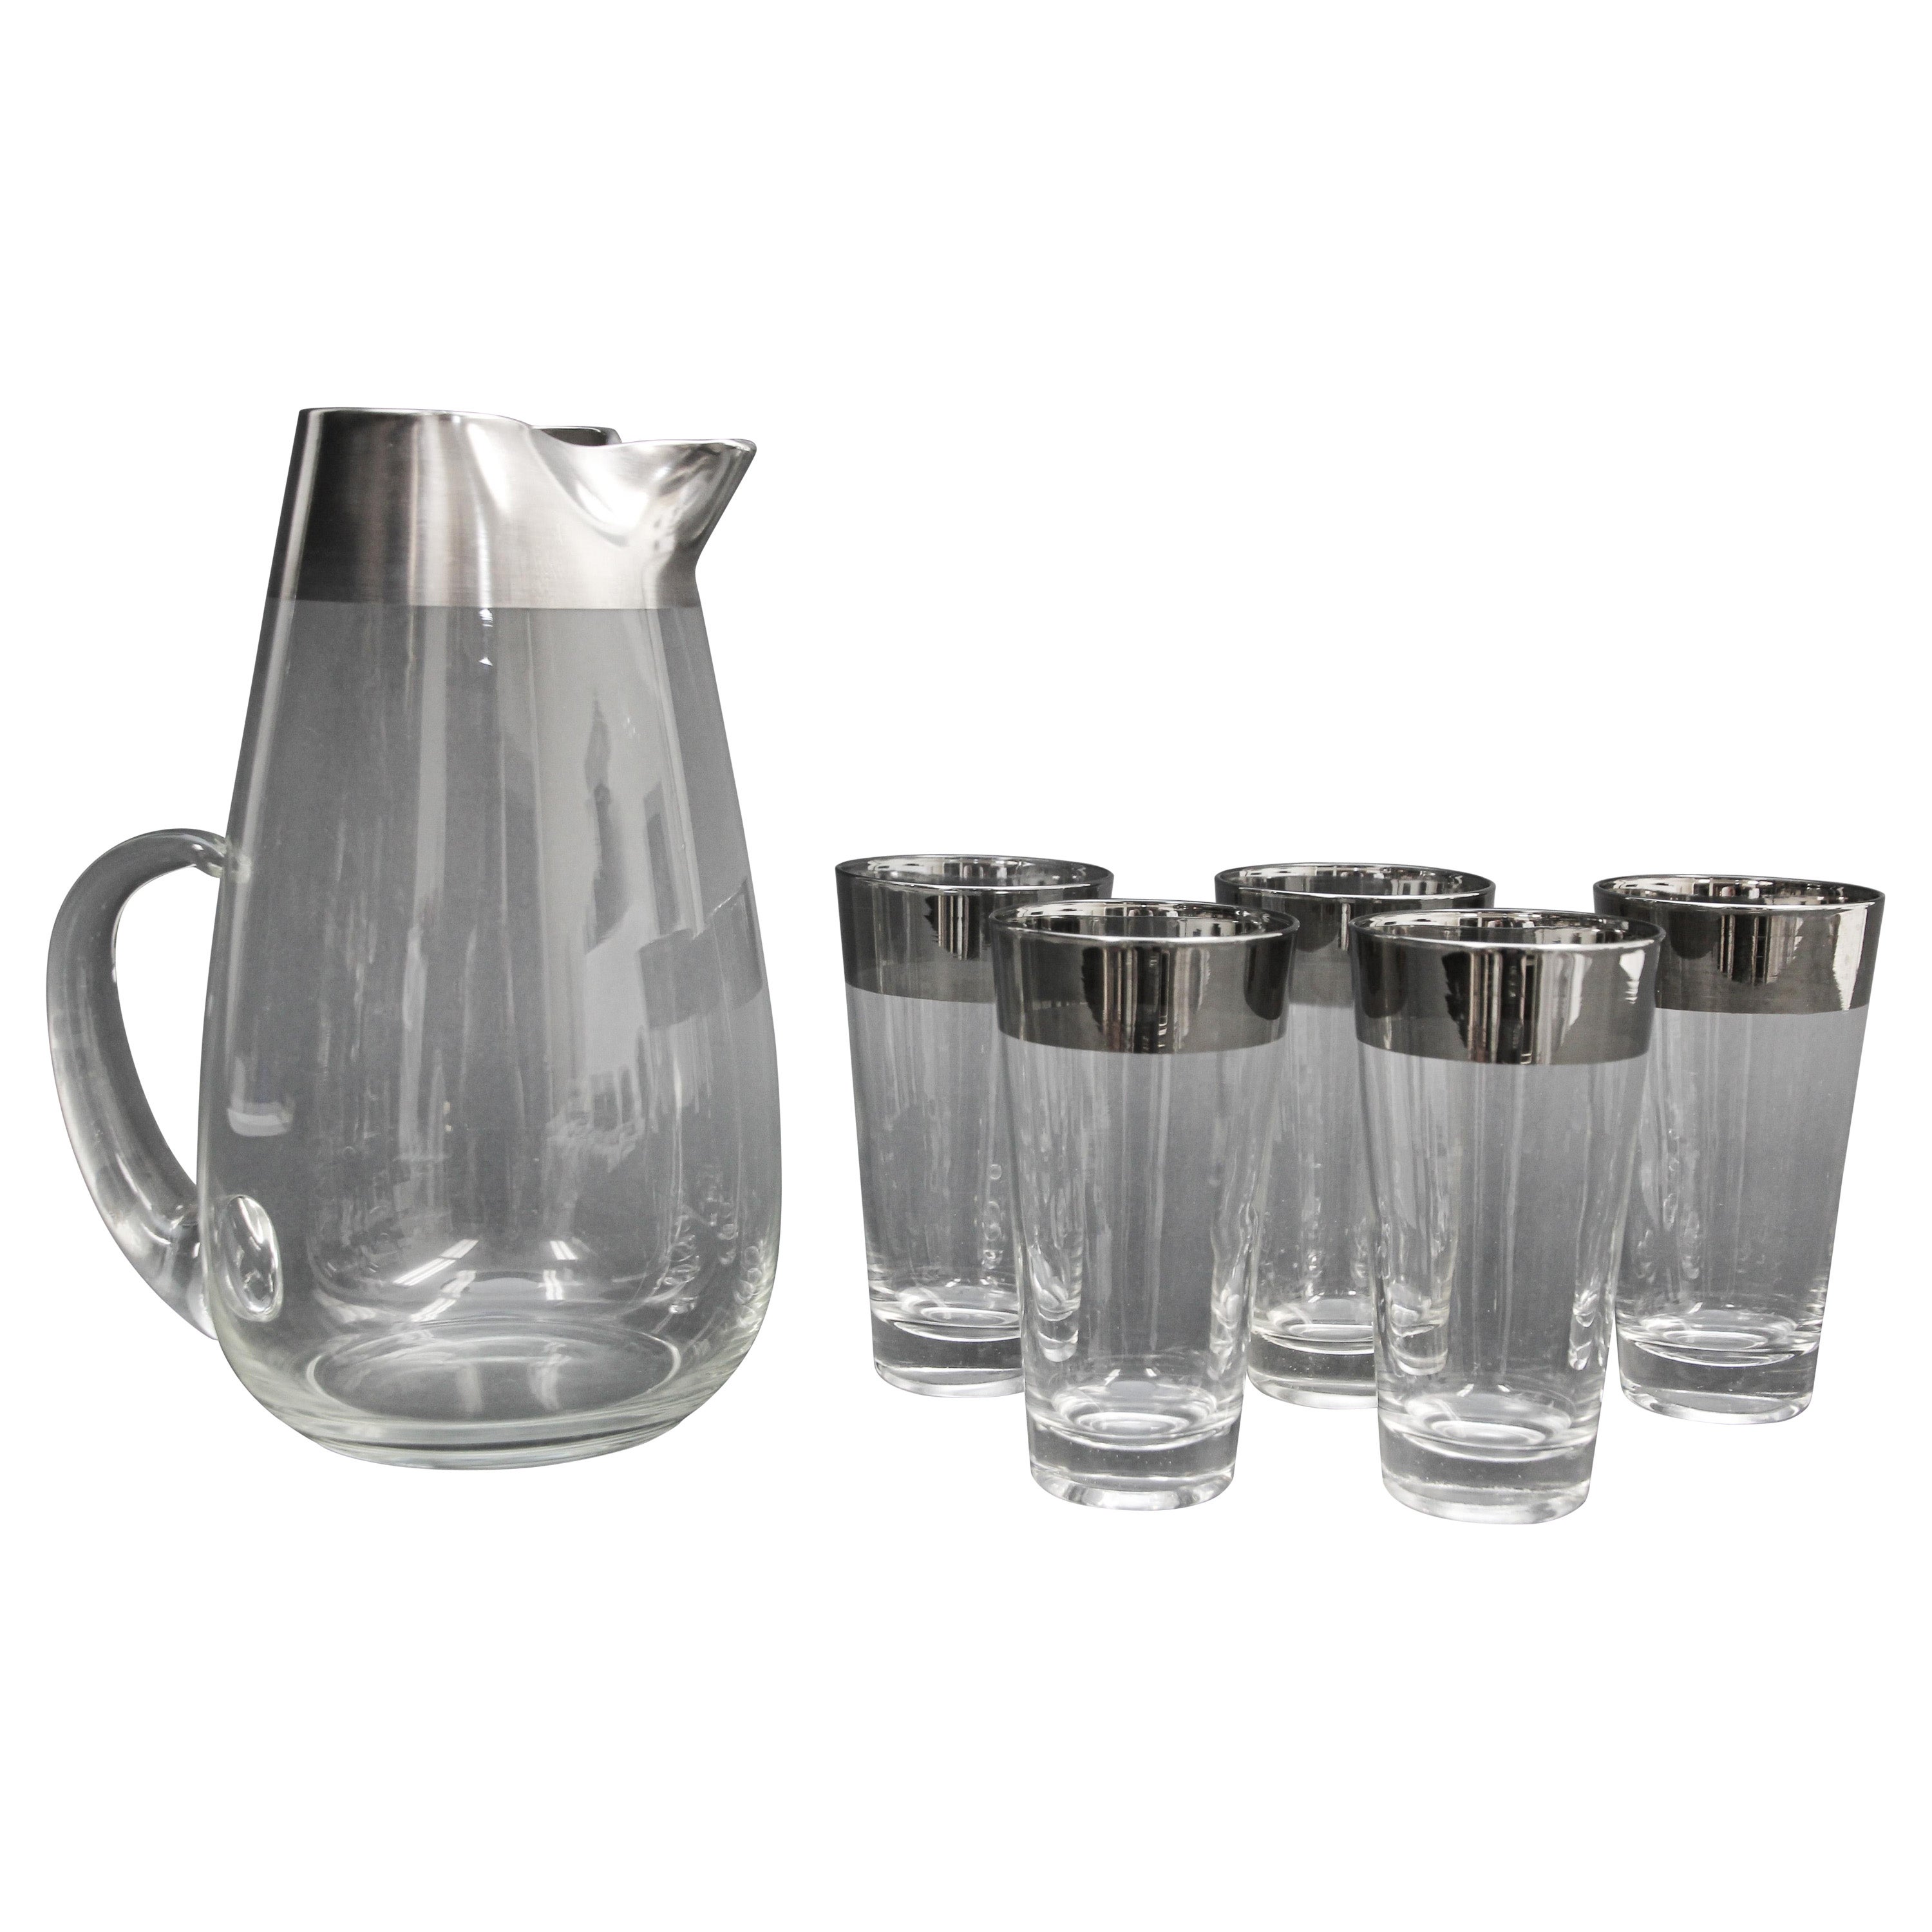 Dorothy Thorpe Mid-Century Silver Cocktail Barware Glasses and Pitcher